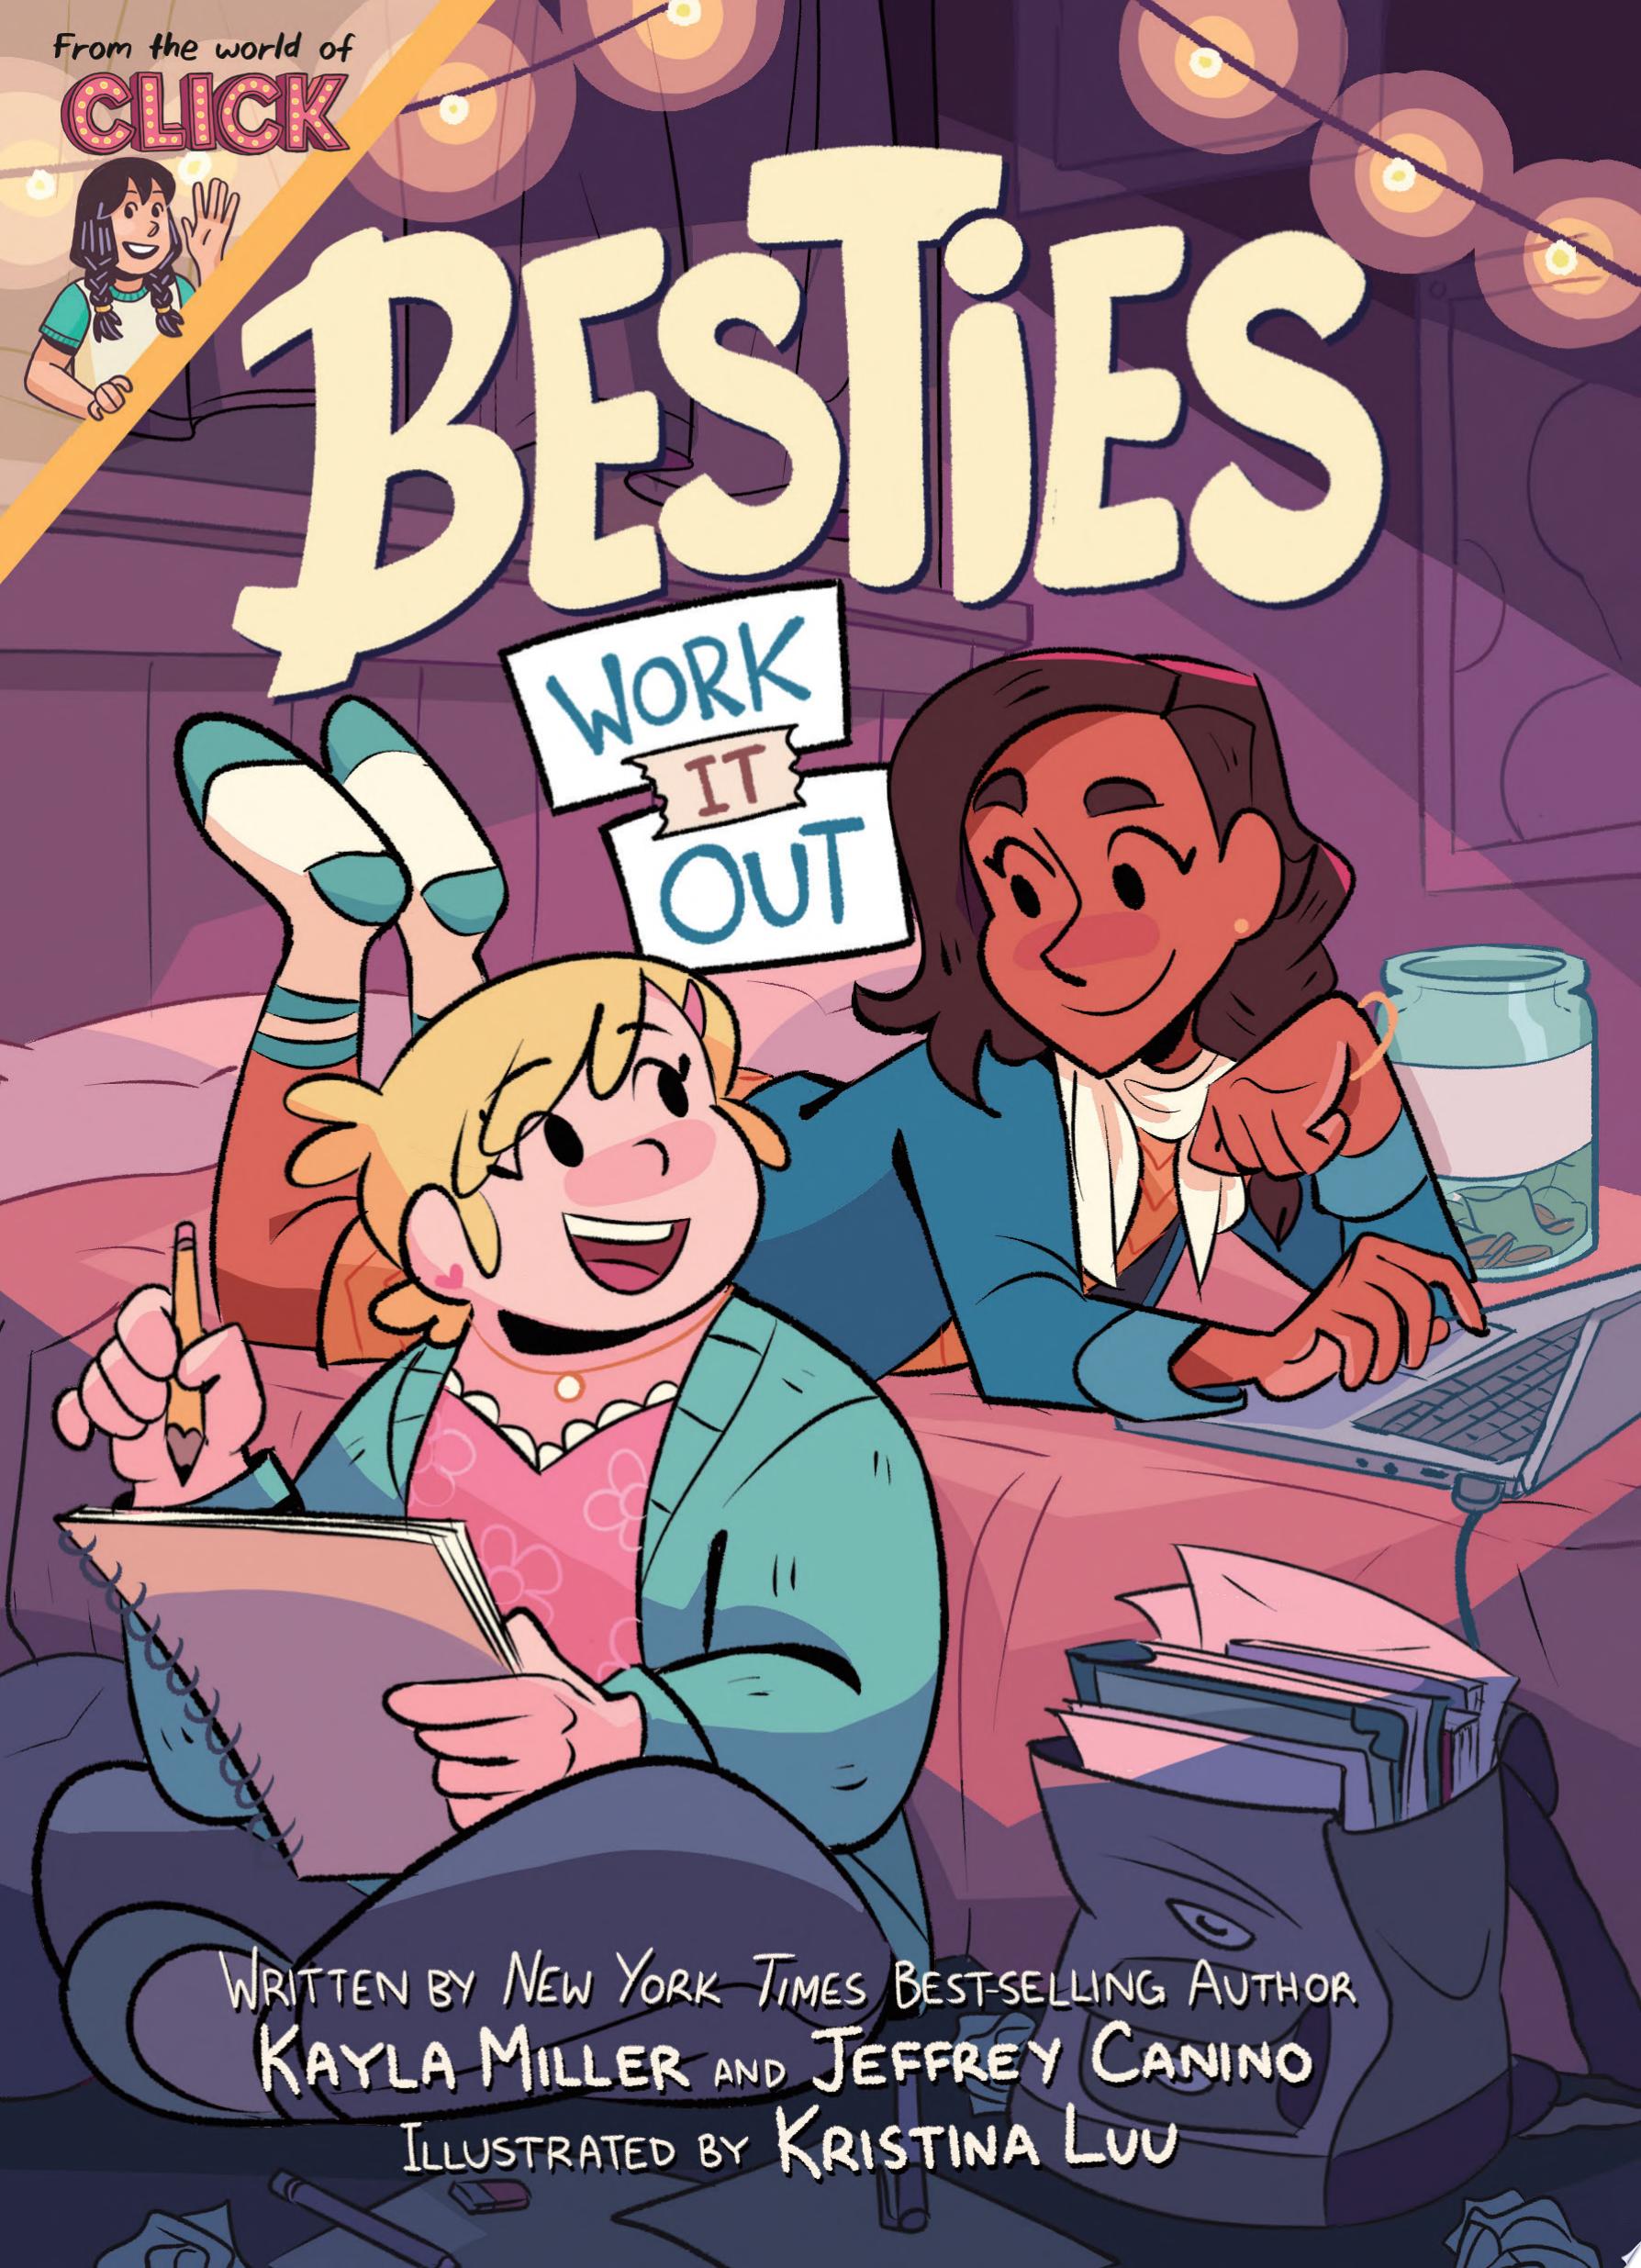 Image for "Besties: Work It Out"